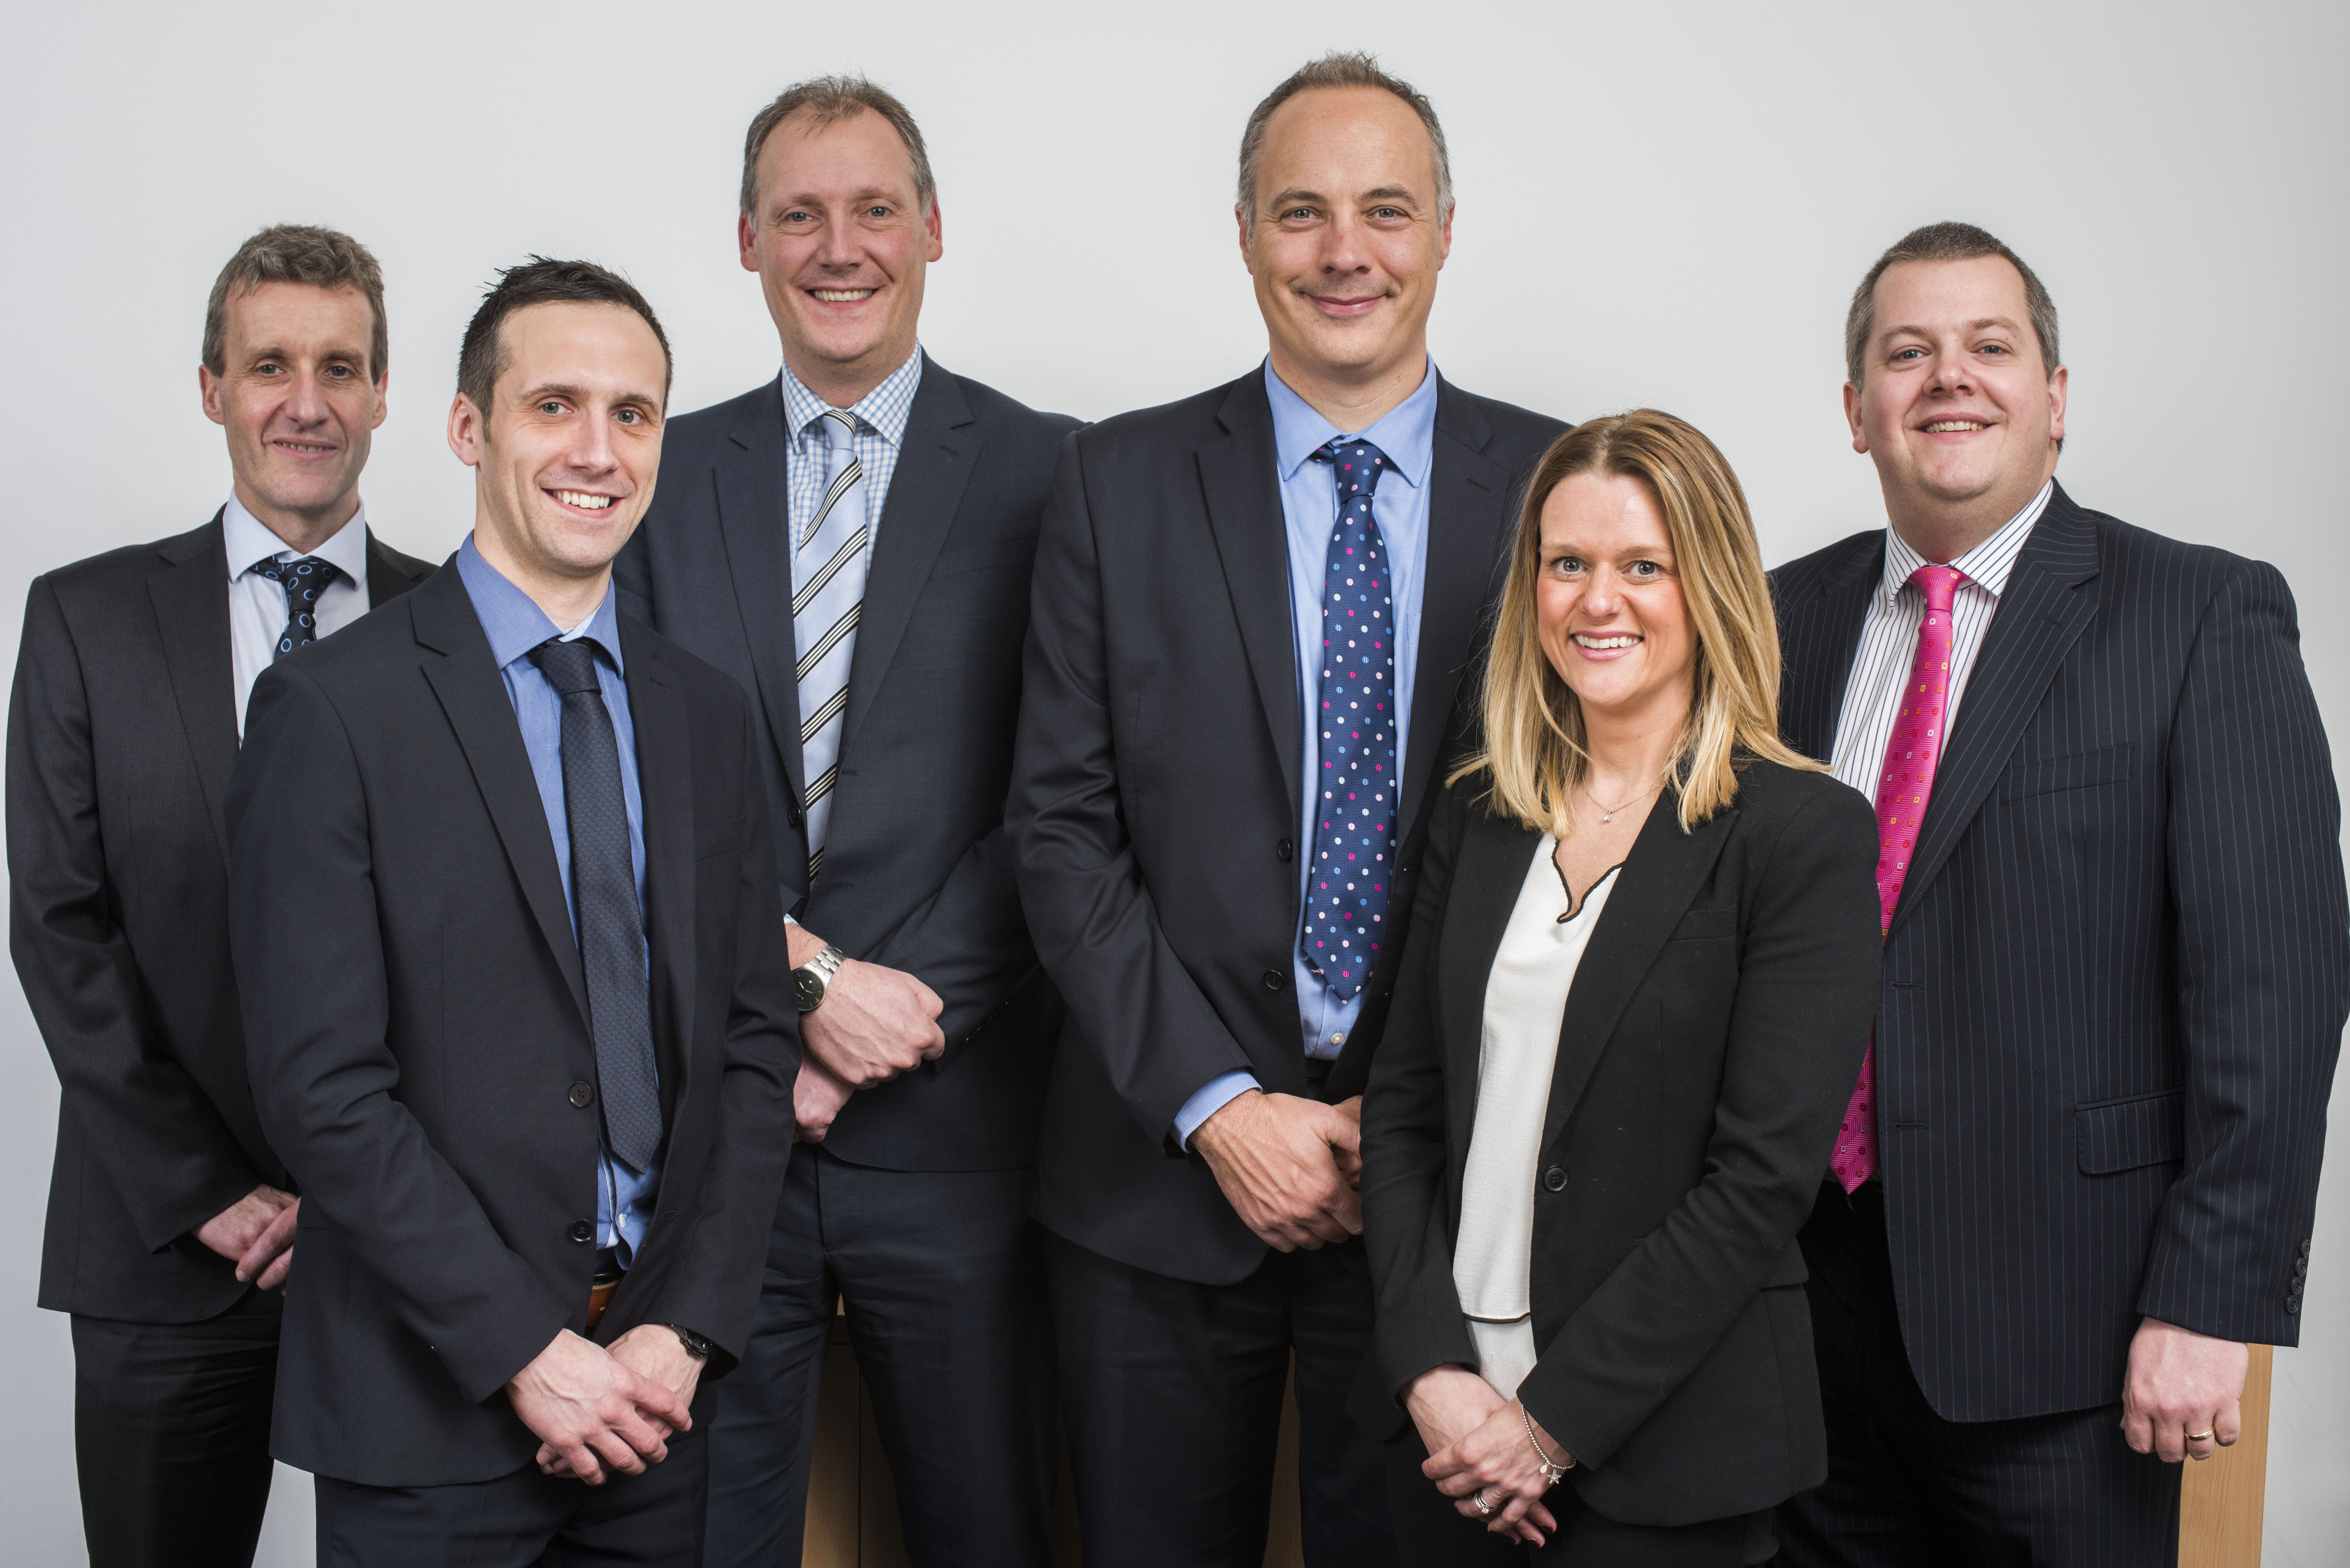 EQ celebrates the completion of over £54m of corporate deals in six months